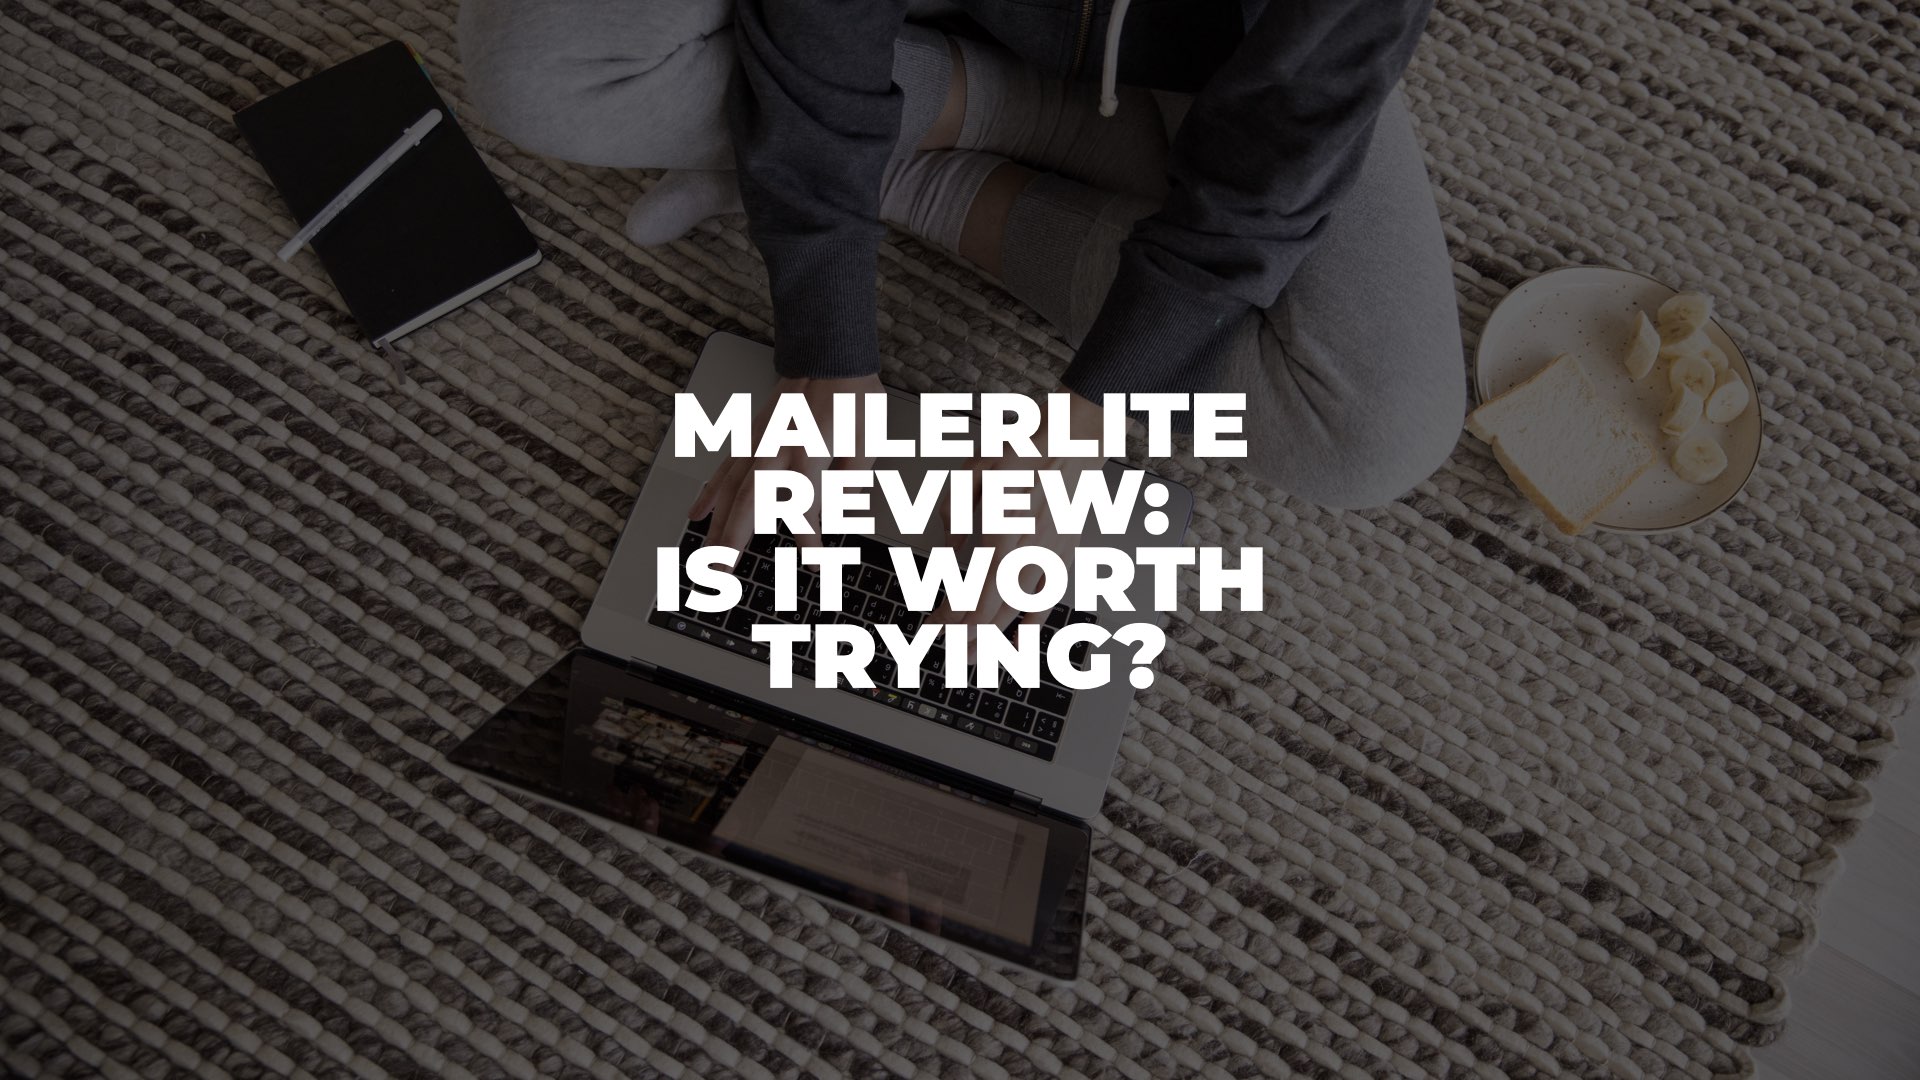 MailerLite Review - Featured Image